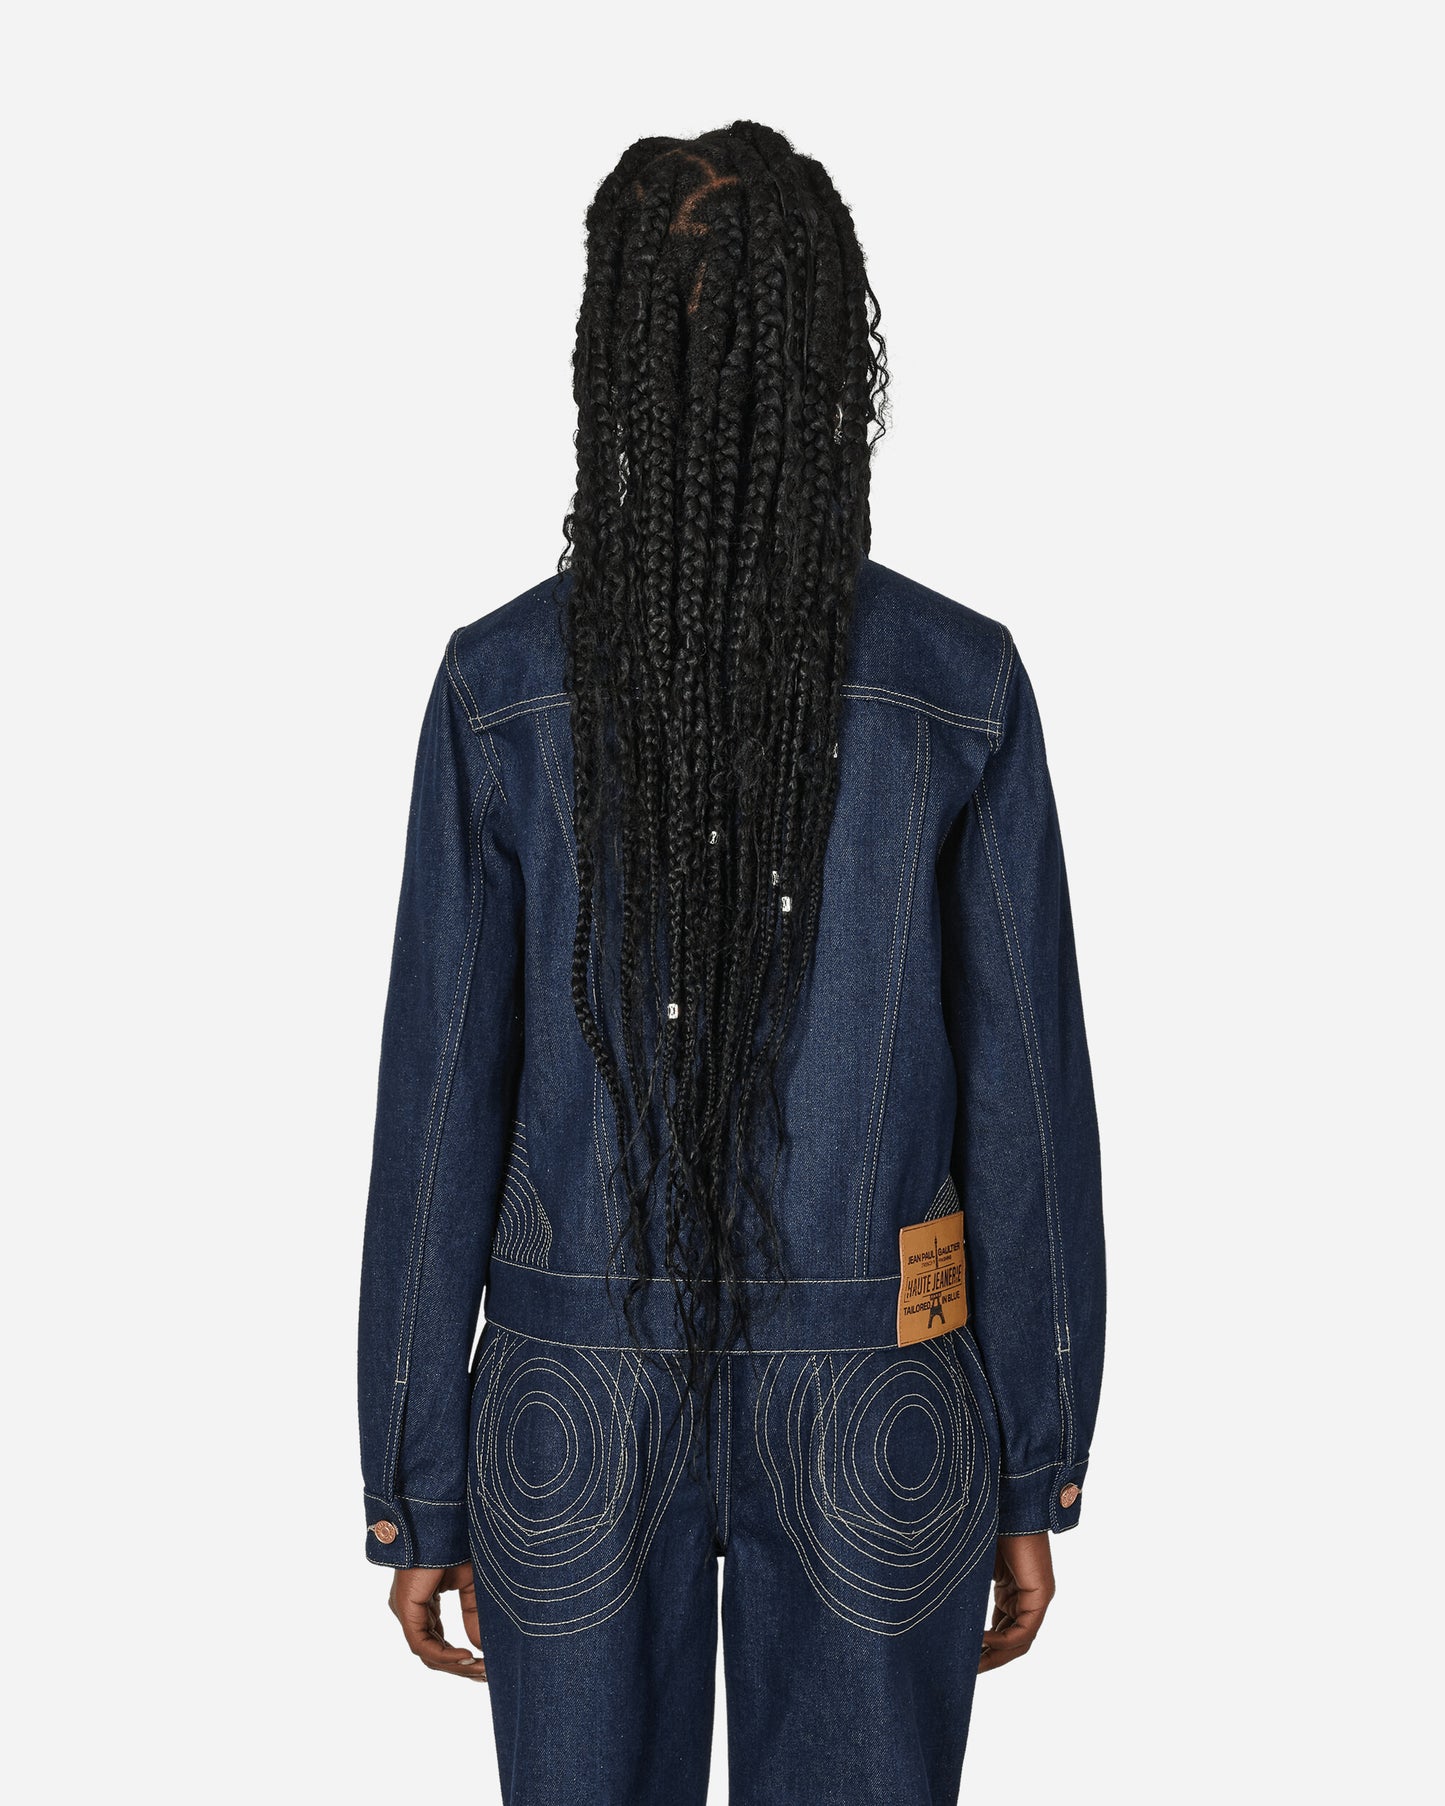 Jean Paul Gaultier Wmns Denim Jacket With Contrasted Top Stitching Madonna Inspired Indigo/Tabac Coats and Jackets Denim Jackets F-VE037I-D015 5572